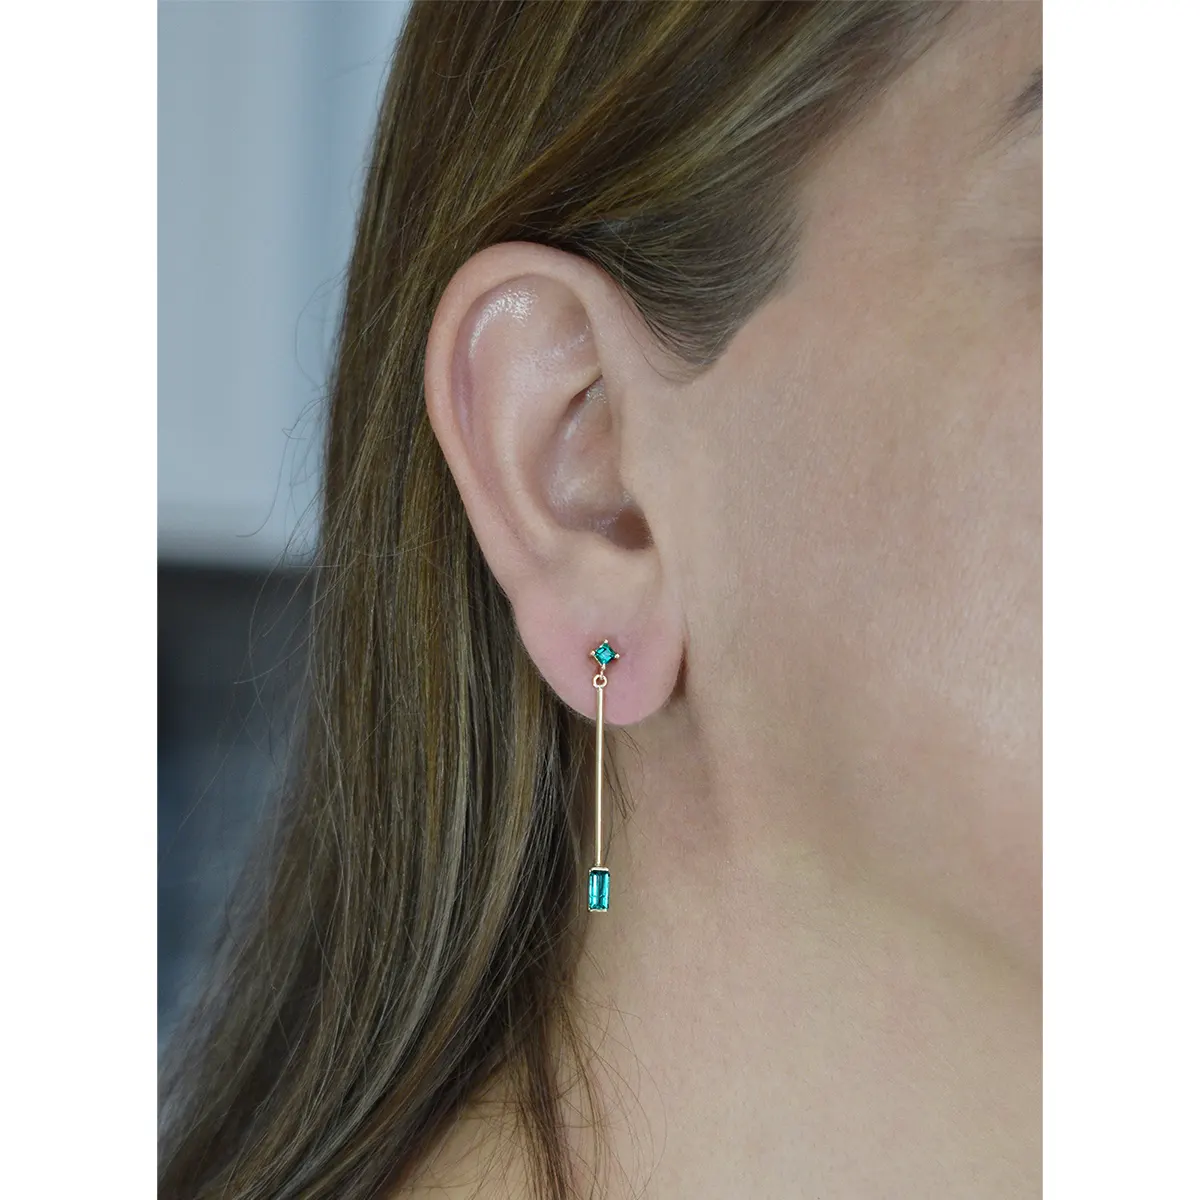 These dangle earrings have 2 small square-cut emeralds set in prongs at the top and 2 long and thing baguette cut emeralds set at the bottom of each earring in half bezels